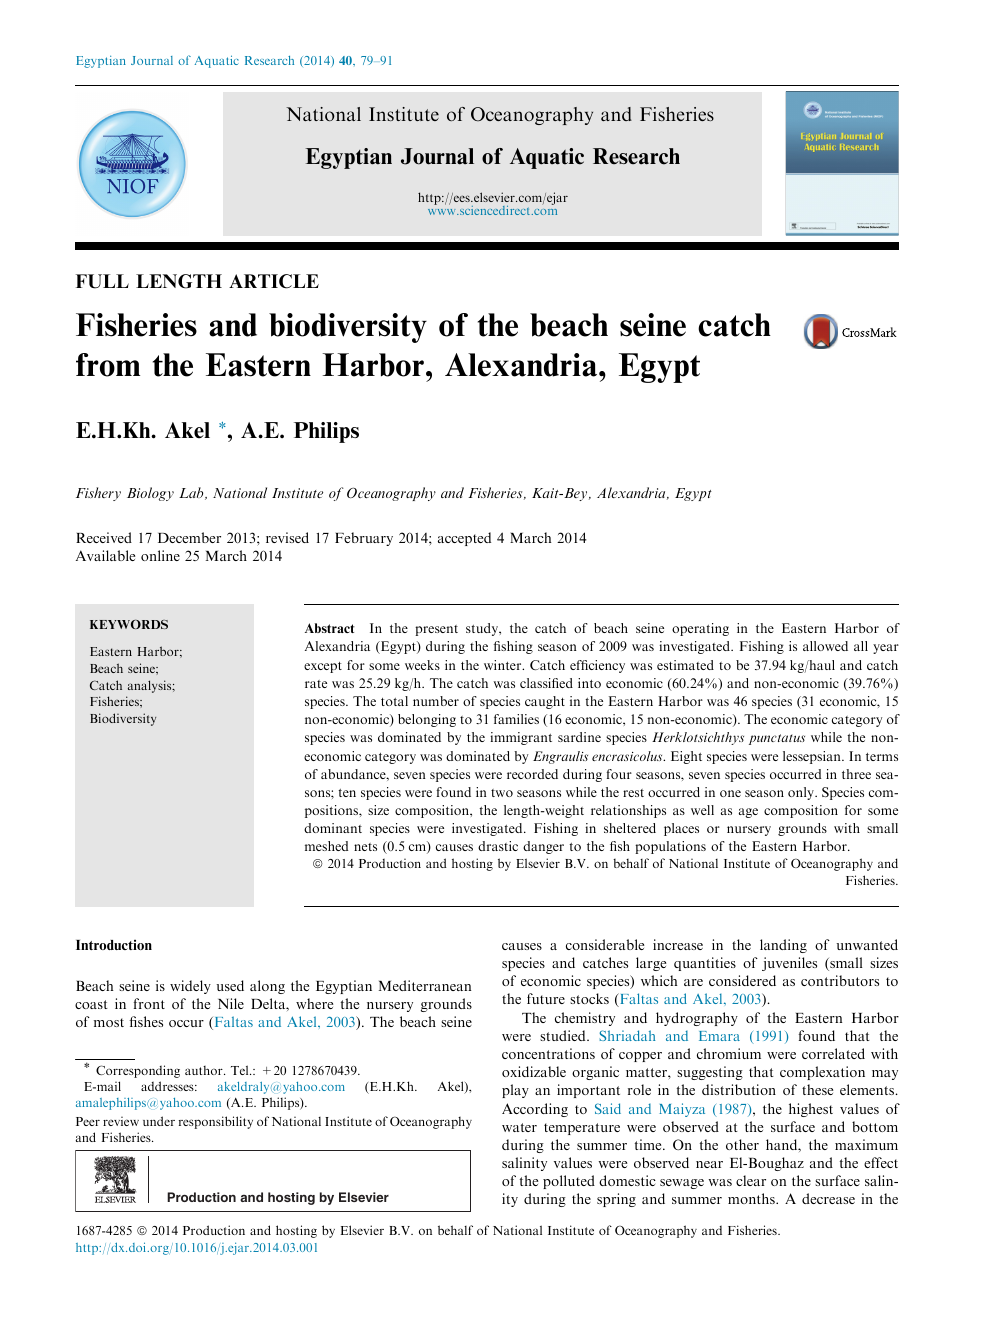 Fisheries And Biodiversity Of The Beach Seine Catch From The Eastern Harbor Alexandria Egypt Topic Of Research Paper In Biological Sciences Download Scholarly Article Pdf And Read For Free On Cyberleninka